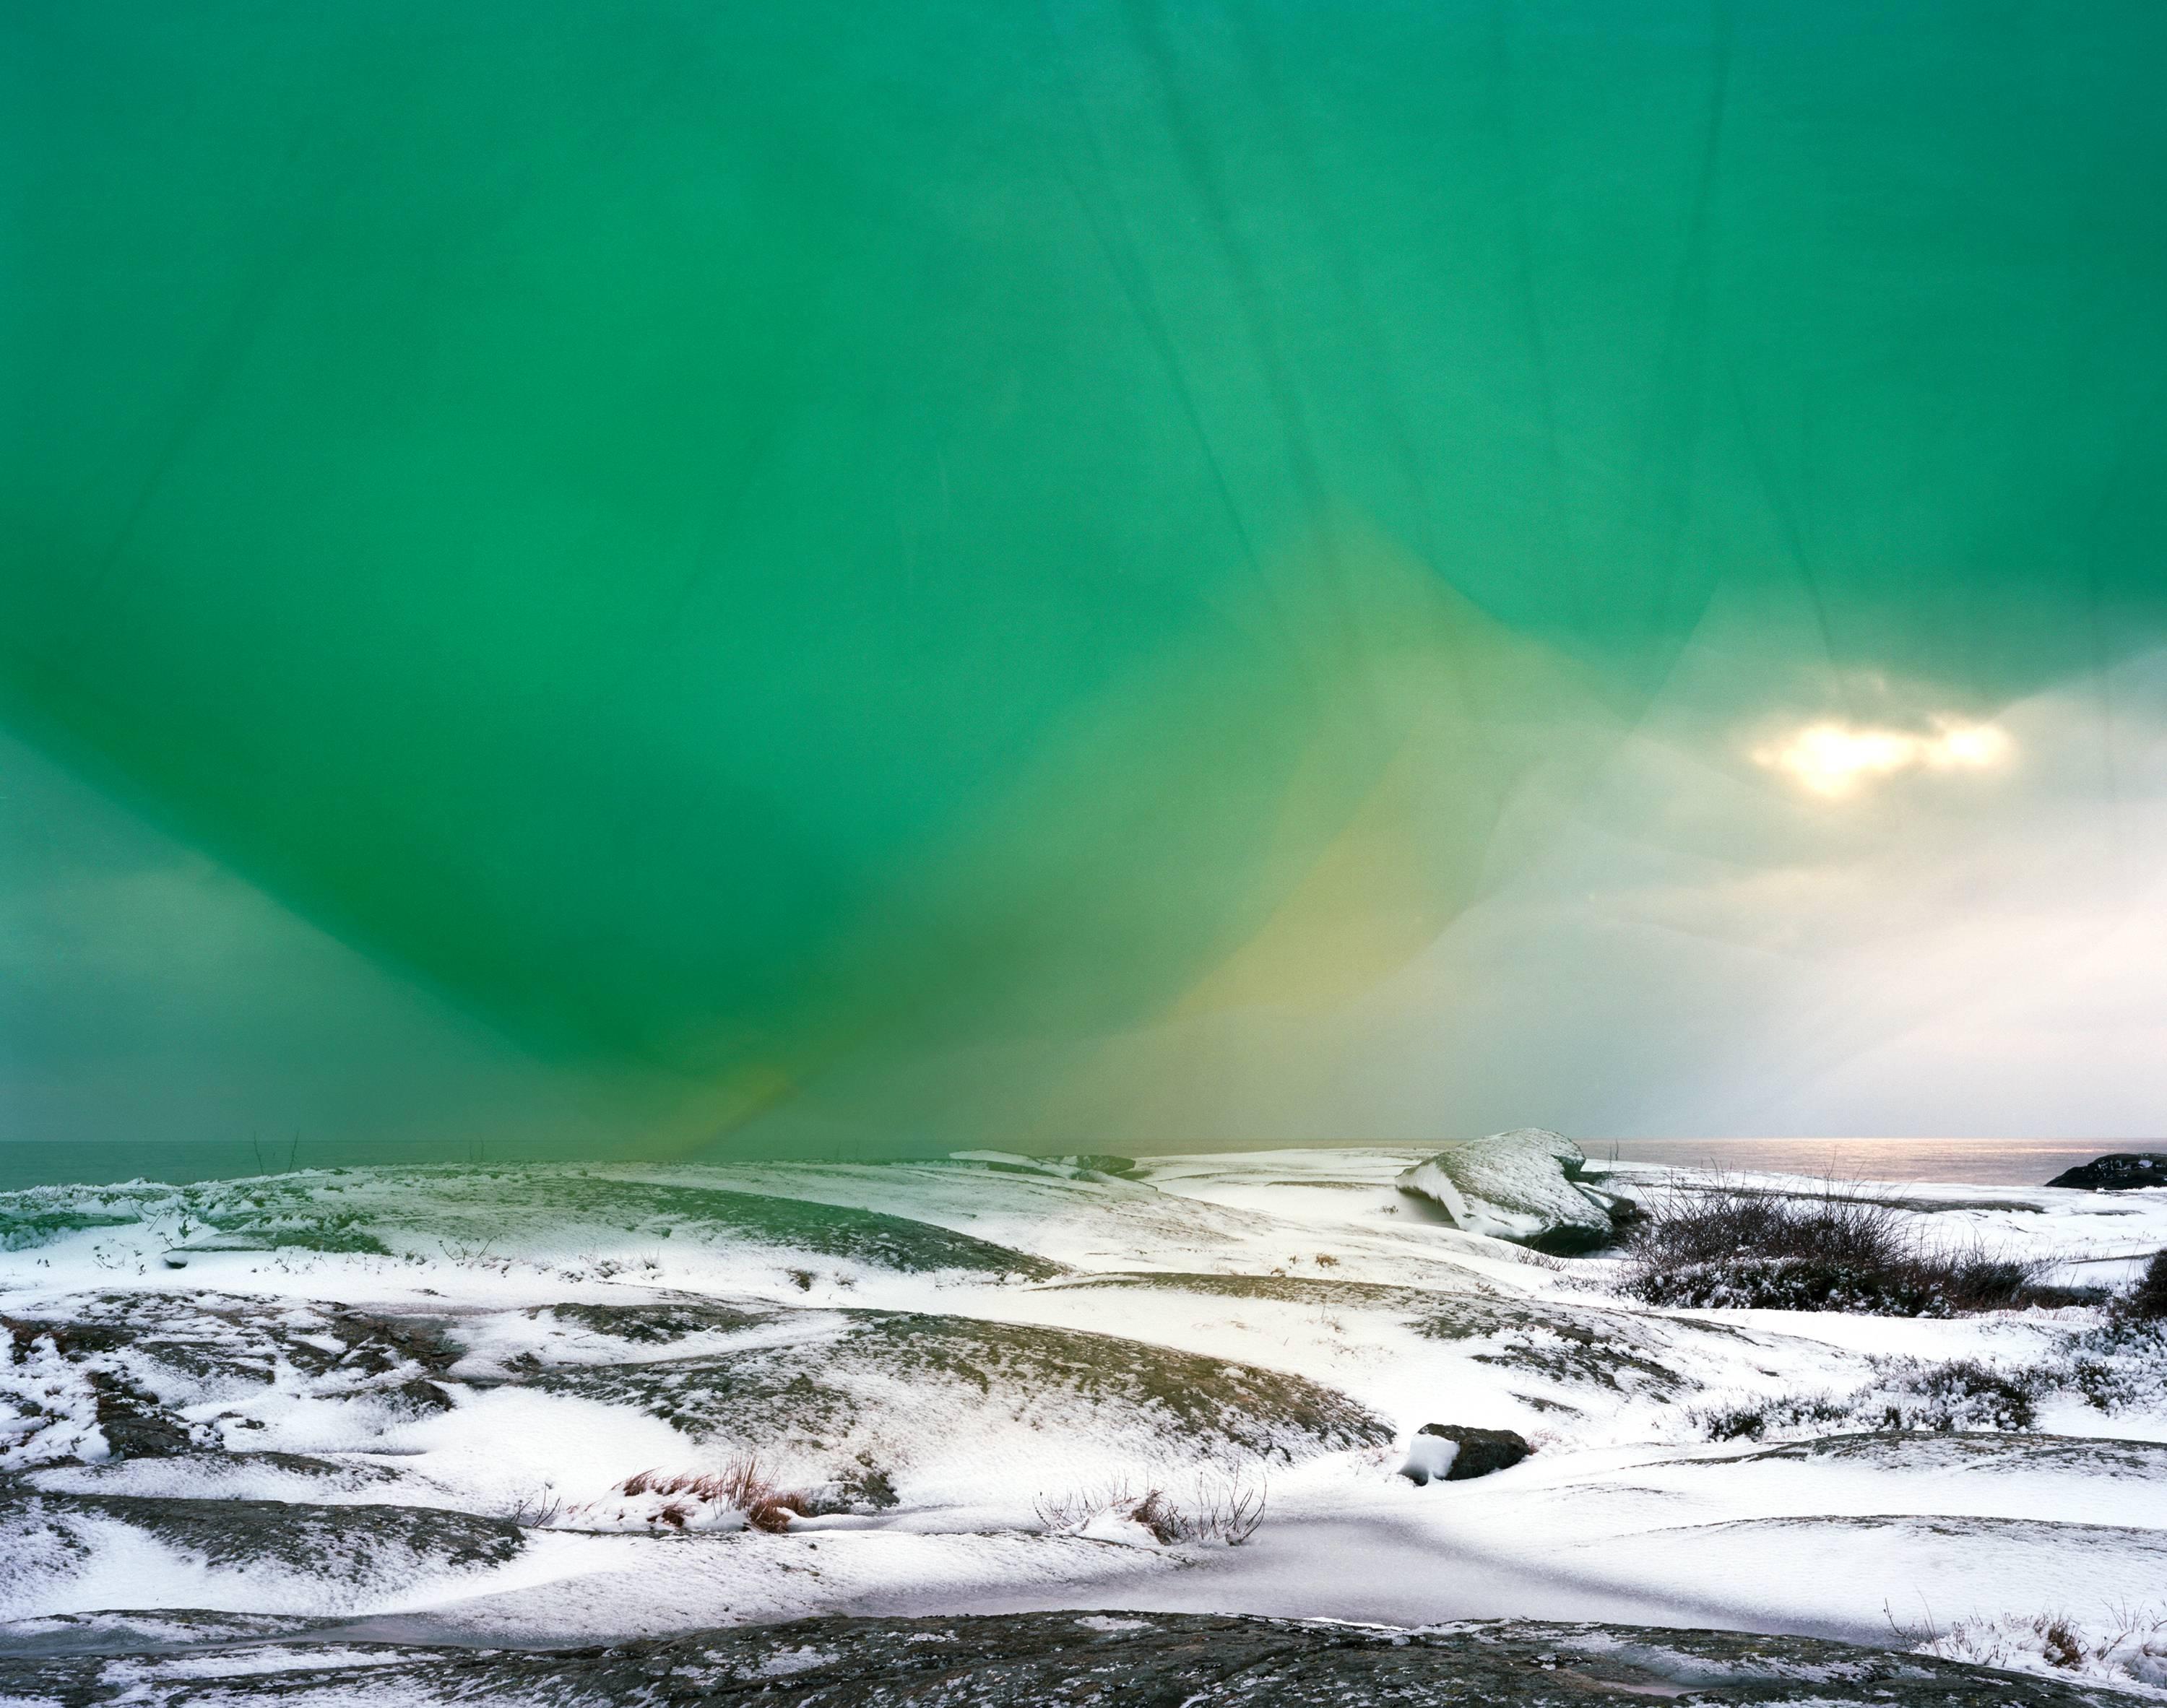 Ole Brodersen Landscape Photograph - Cloth, string and Kite #5- Large abstract landscape green water landscape photo